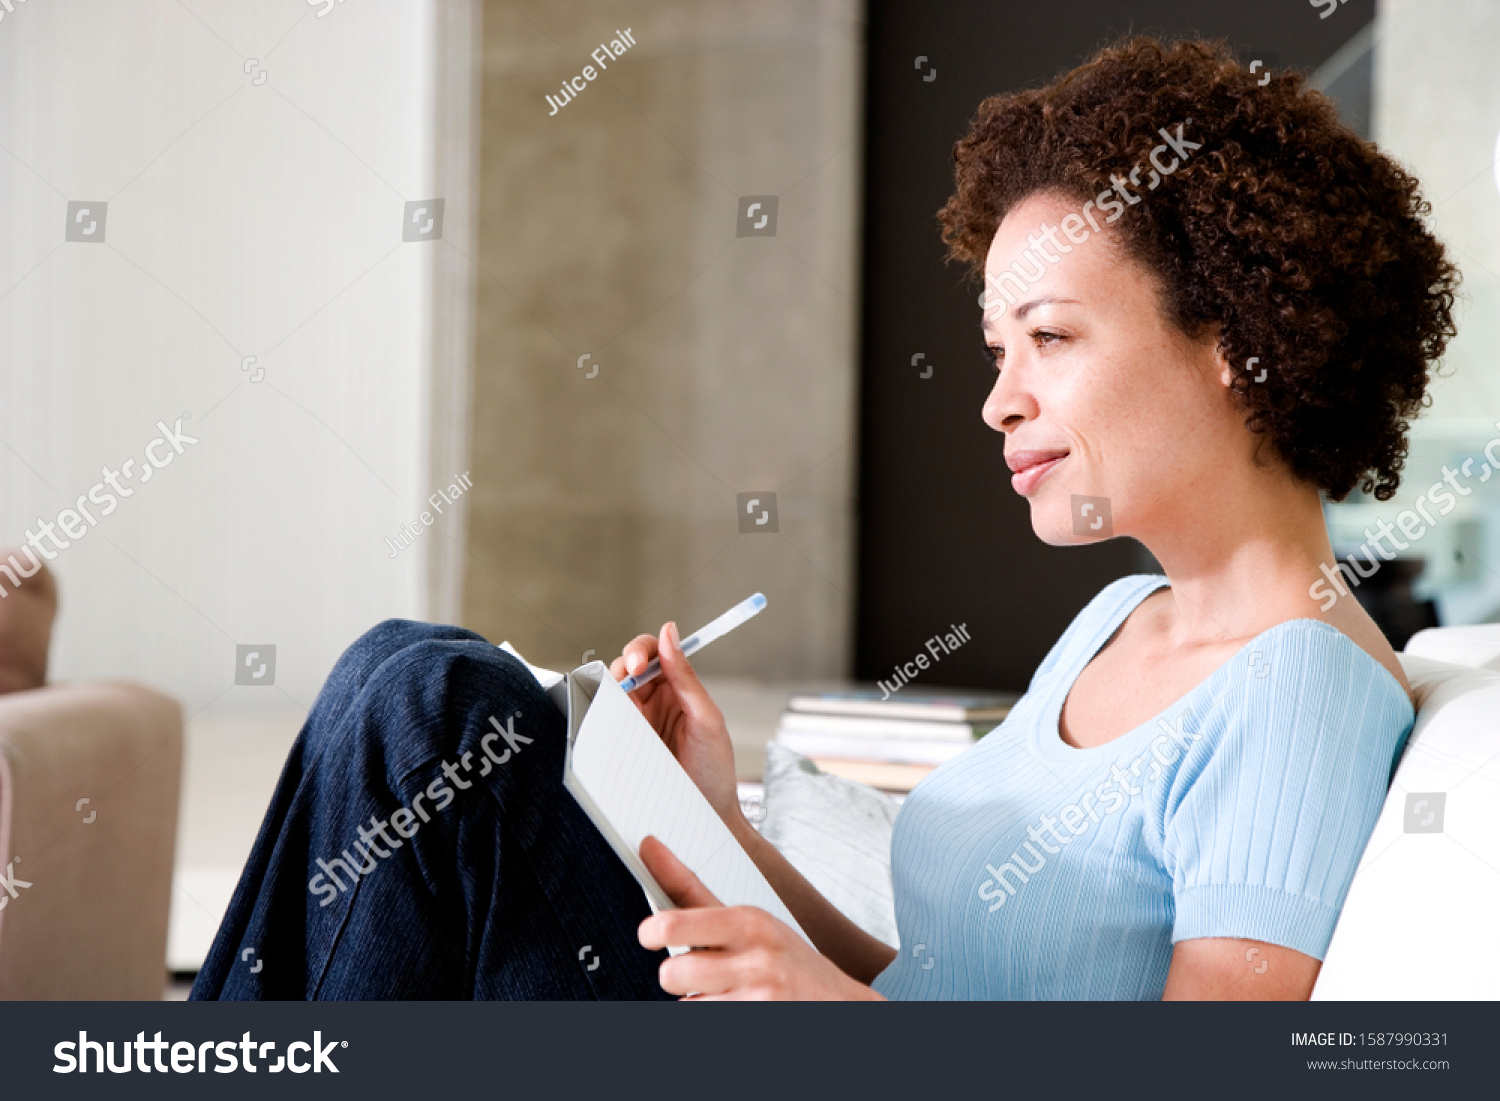 Woman writing a diary or journal, relaxing at home #1587990331